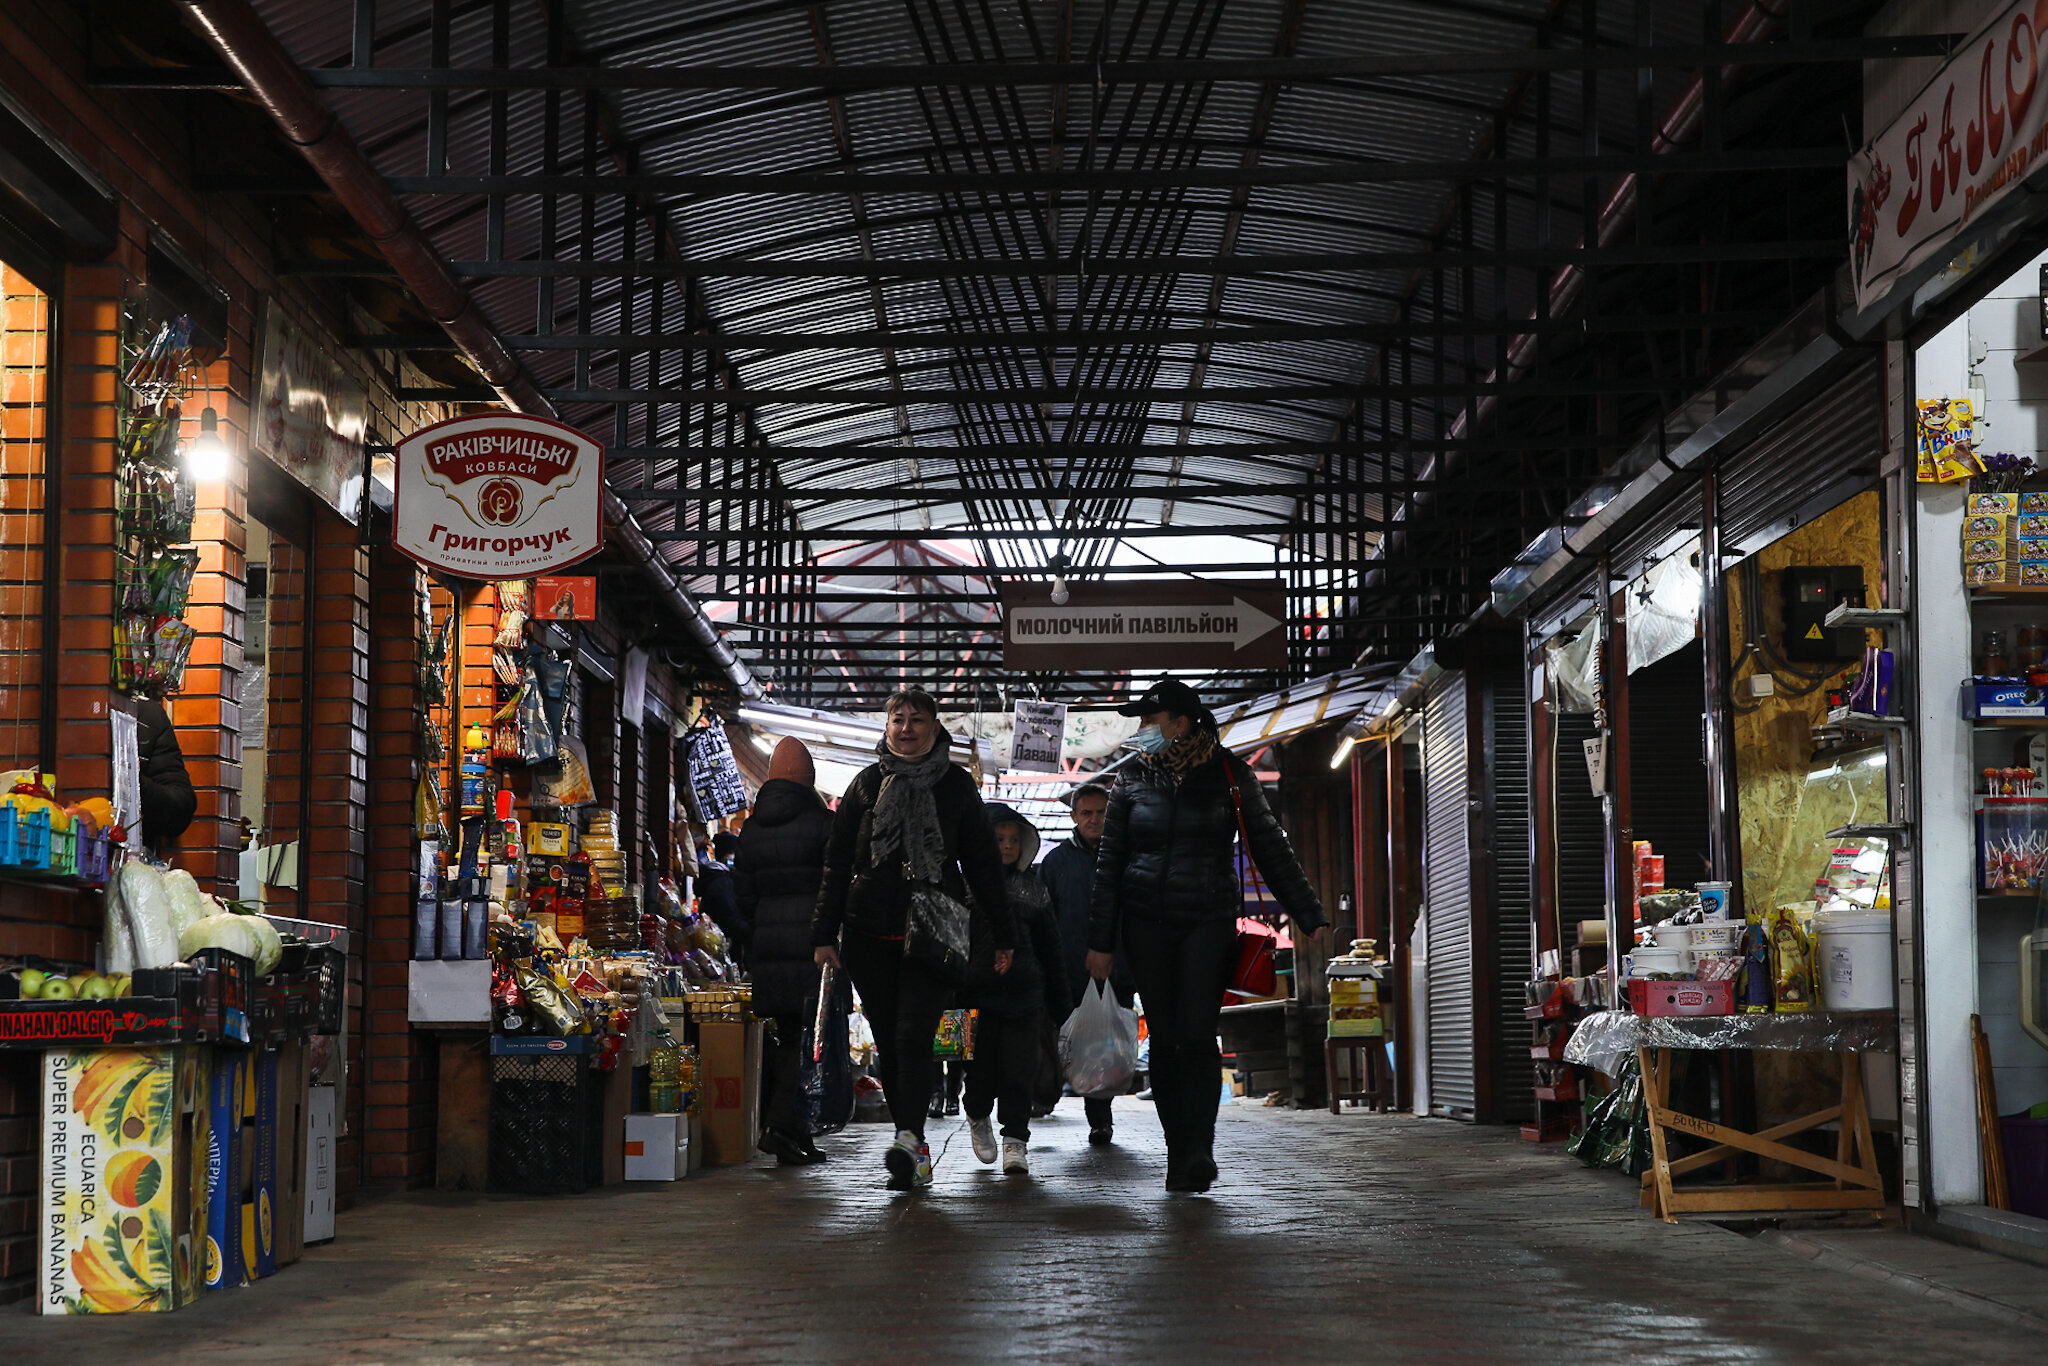 Due to the lockdown, the markets in Kolomyia must be closed, however, some vendors continue to work despite the ban.